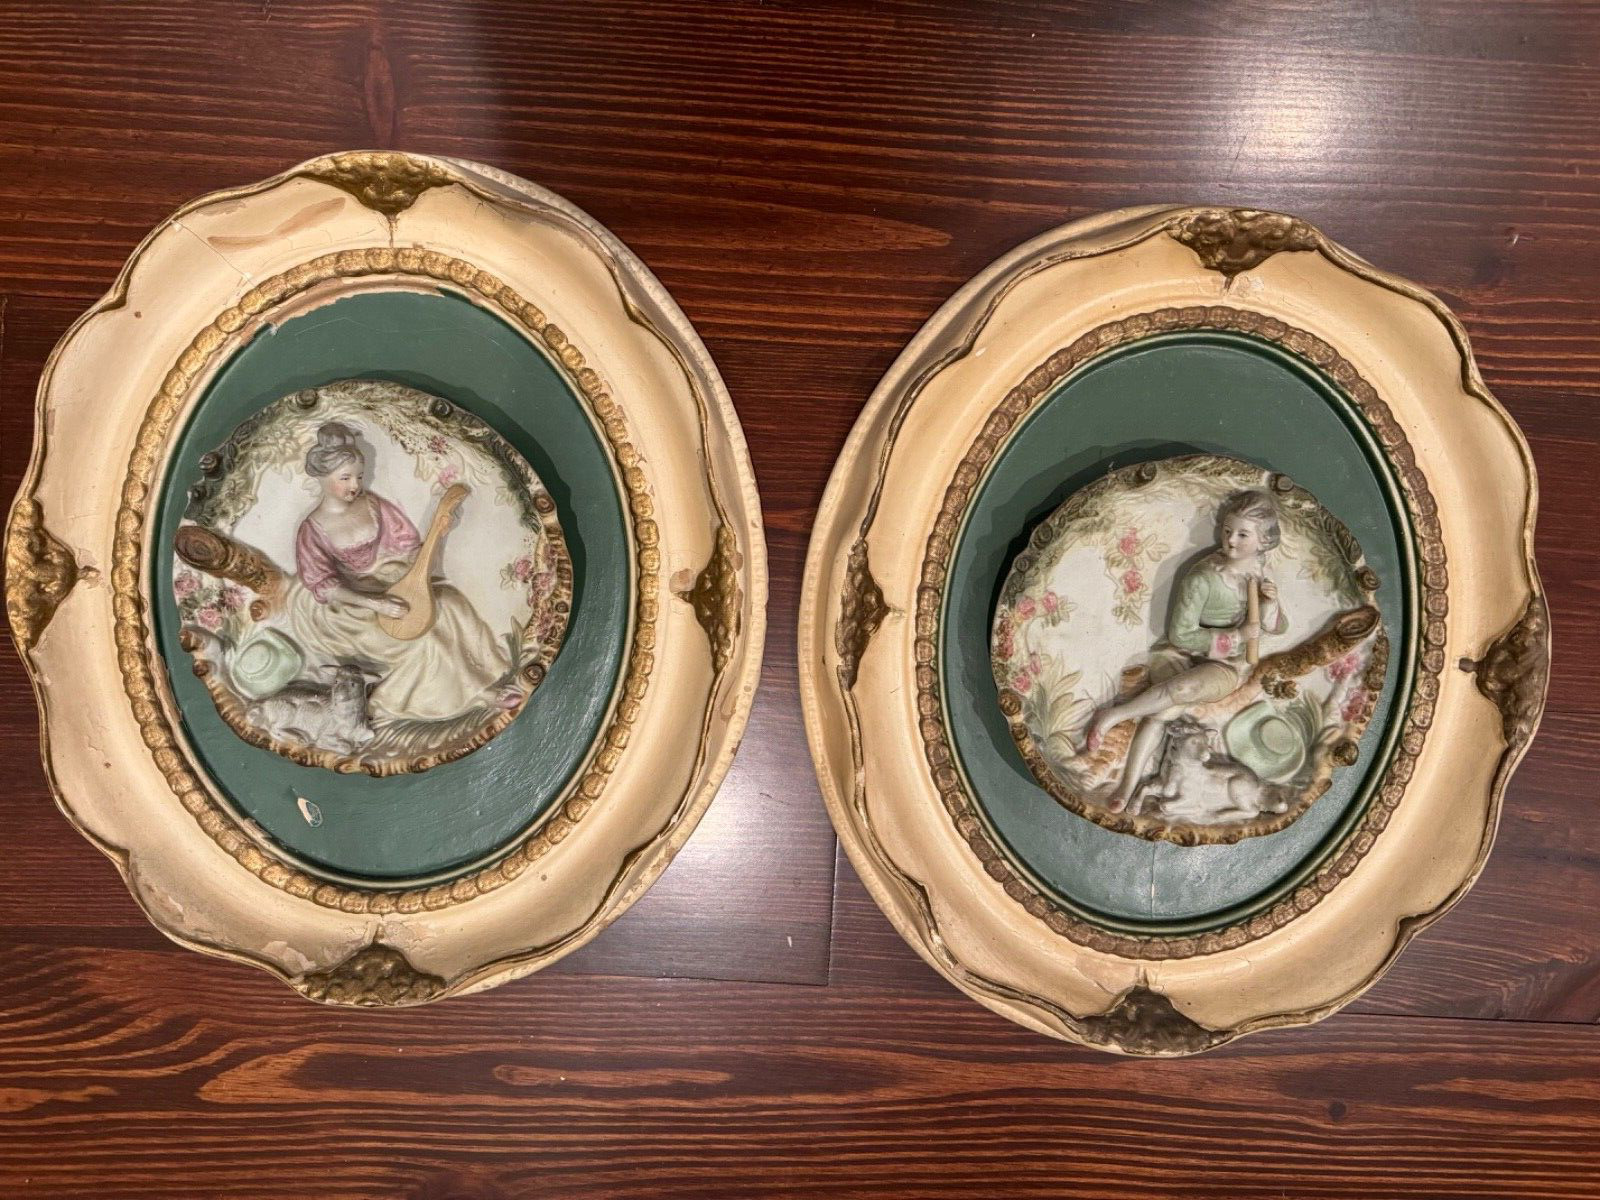 Beautiful Rare Pair of Decorative Oval Cameo Plaster Reliefs Wall Plaques